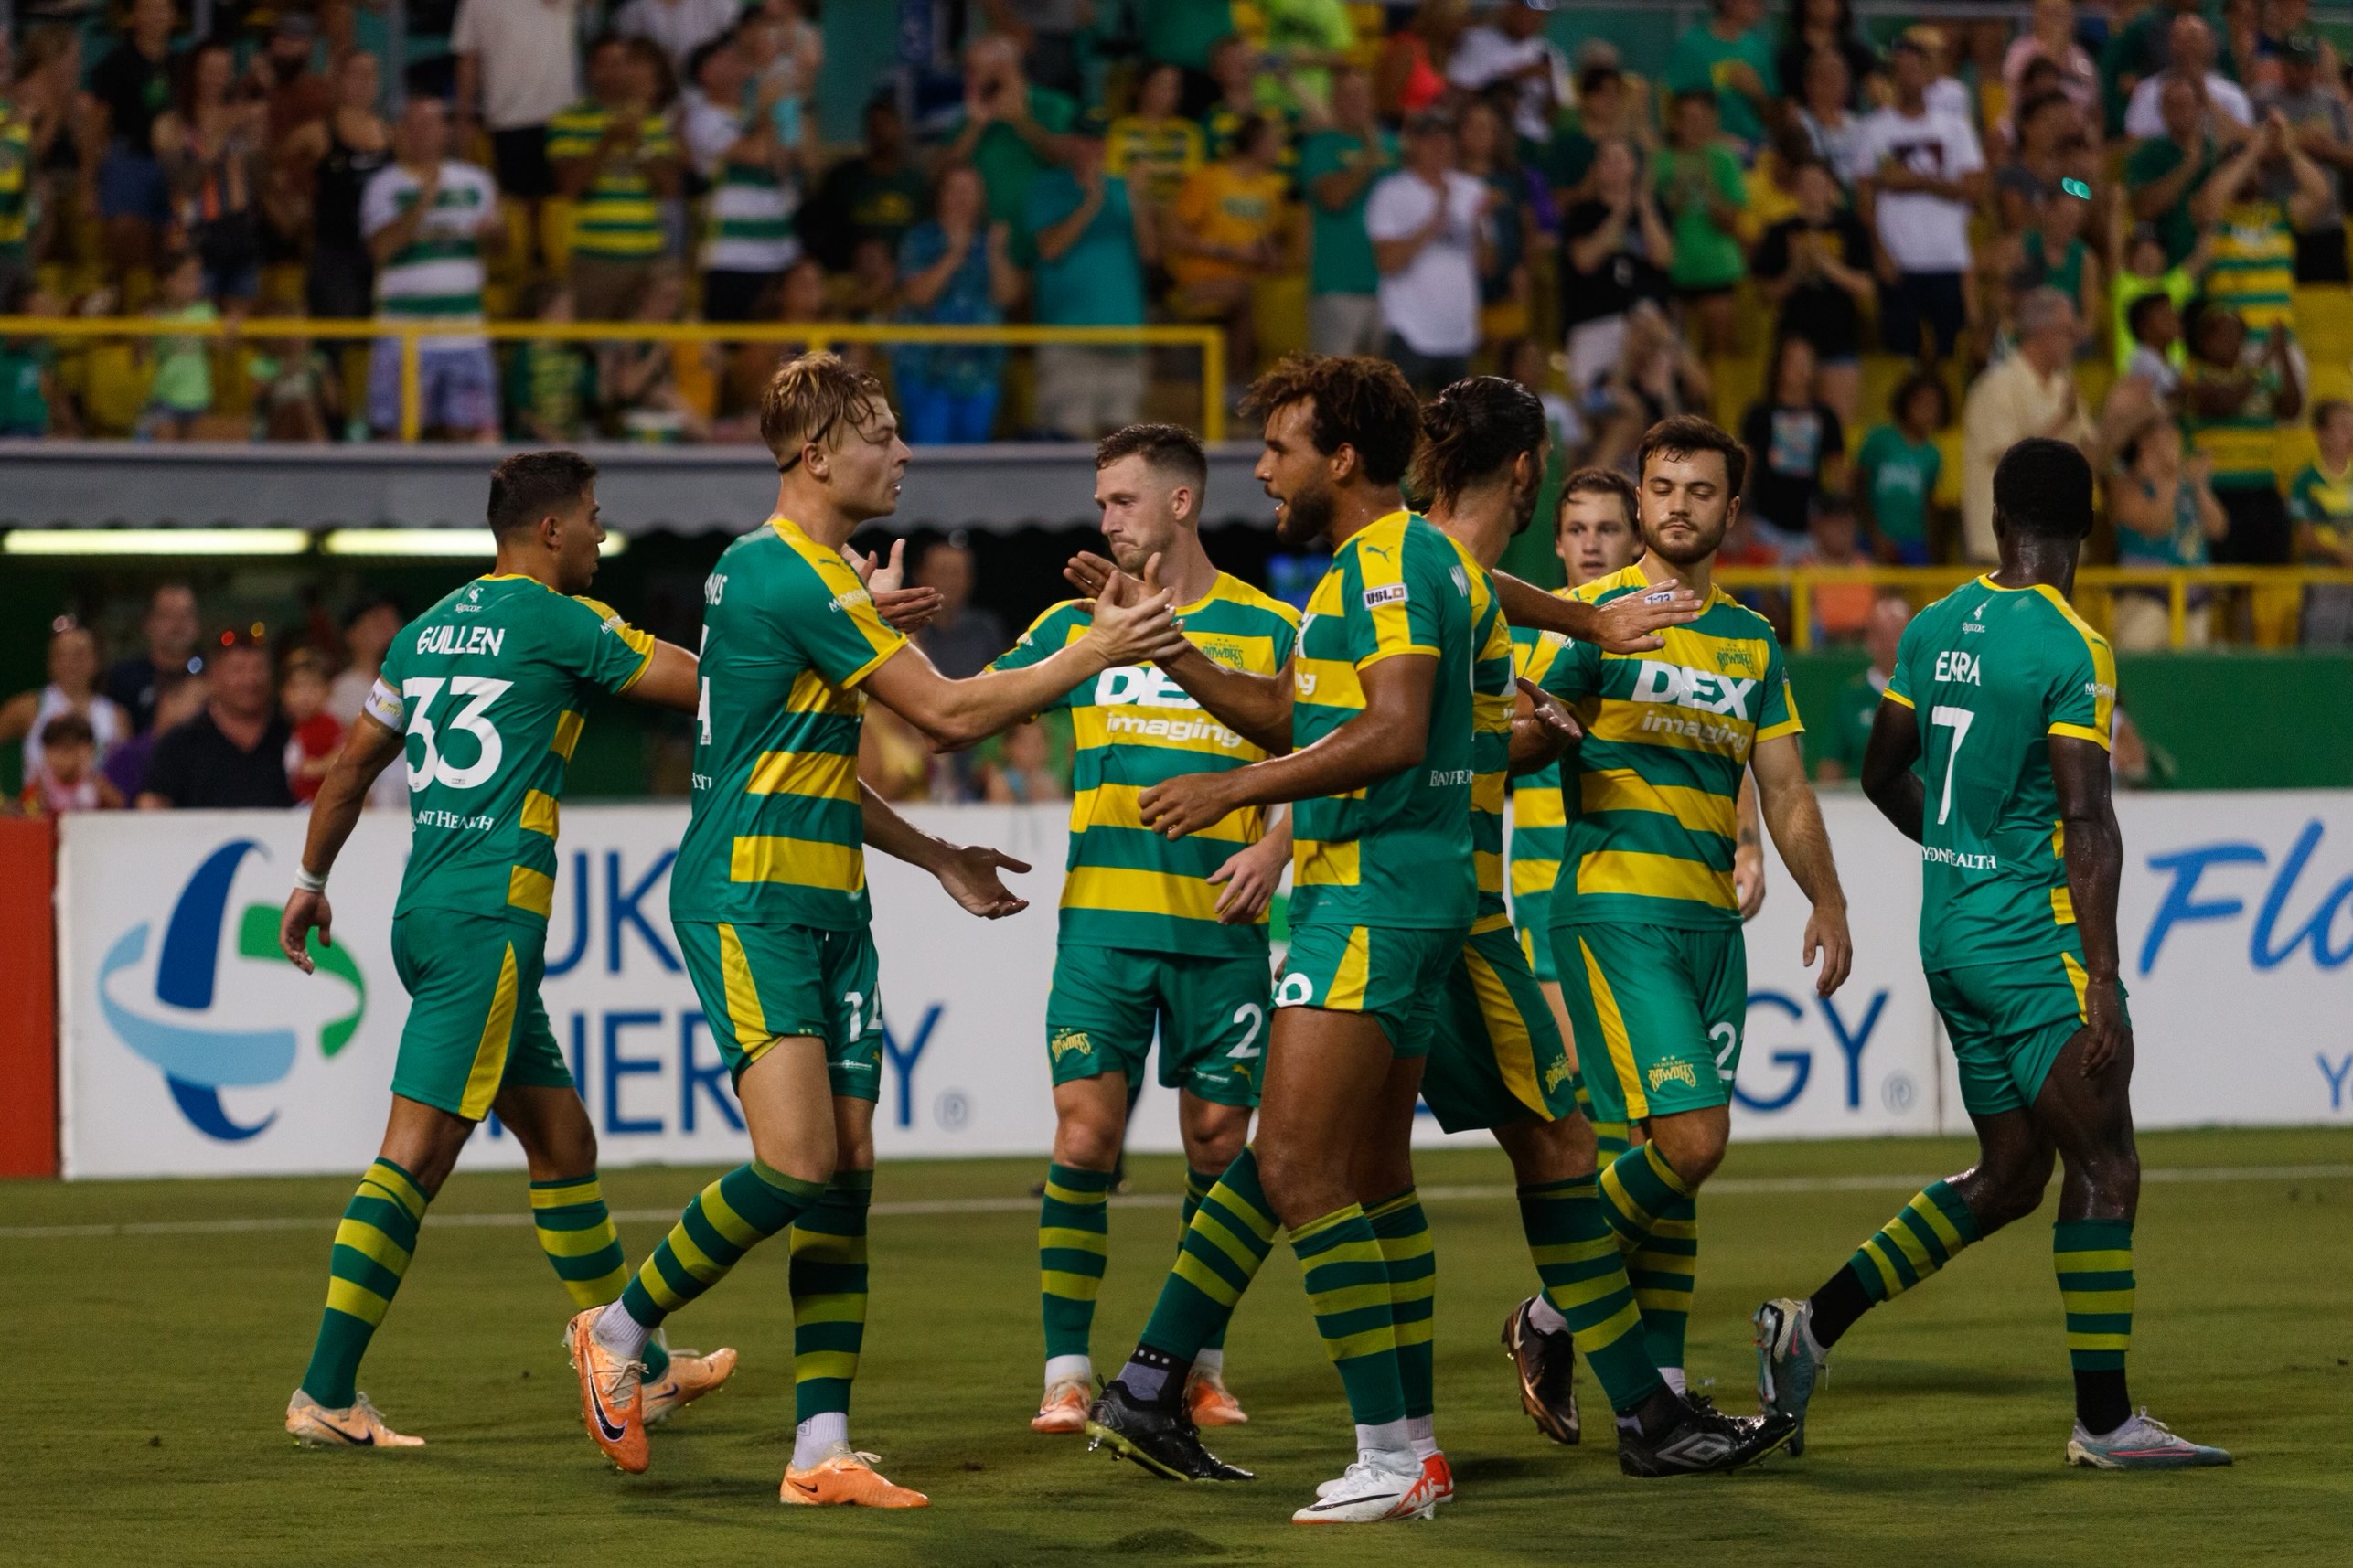 tampa bay rowdies players